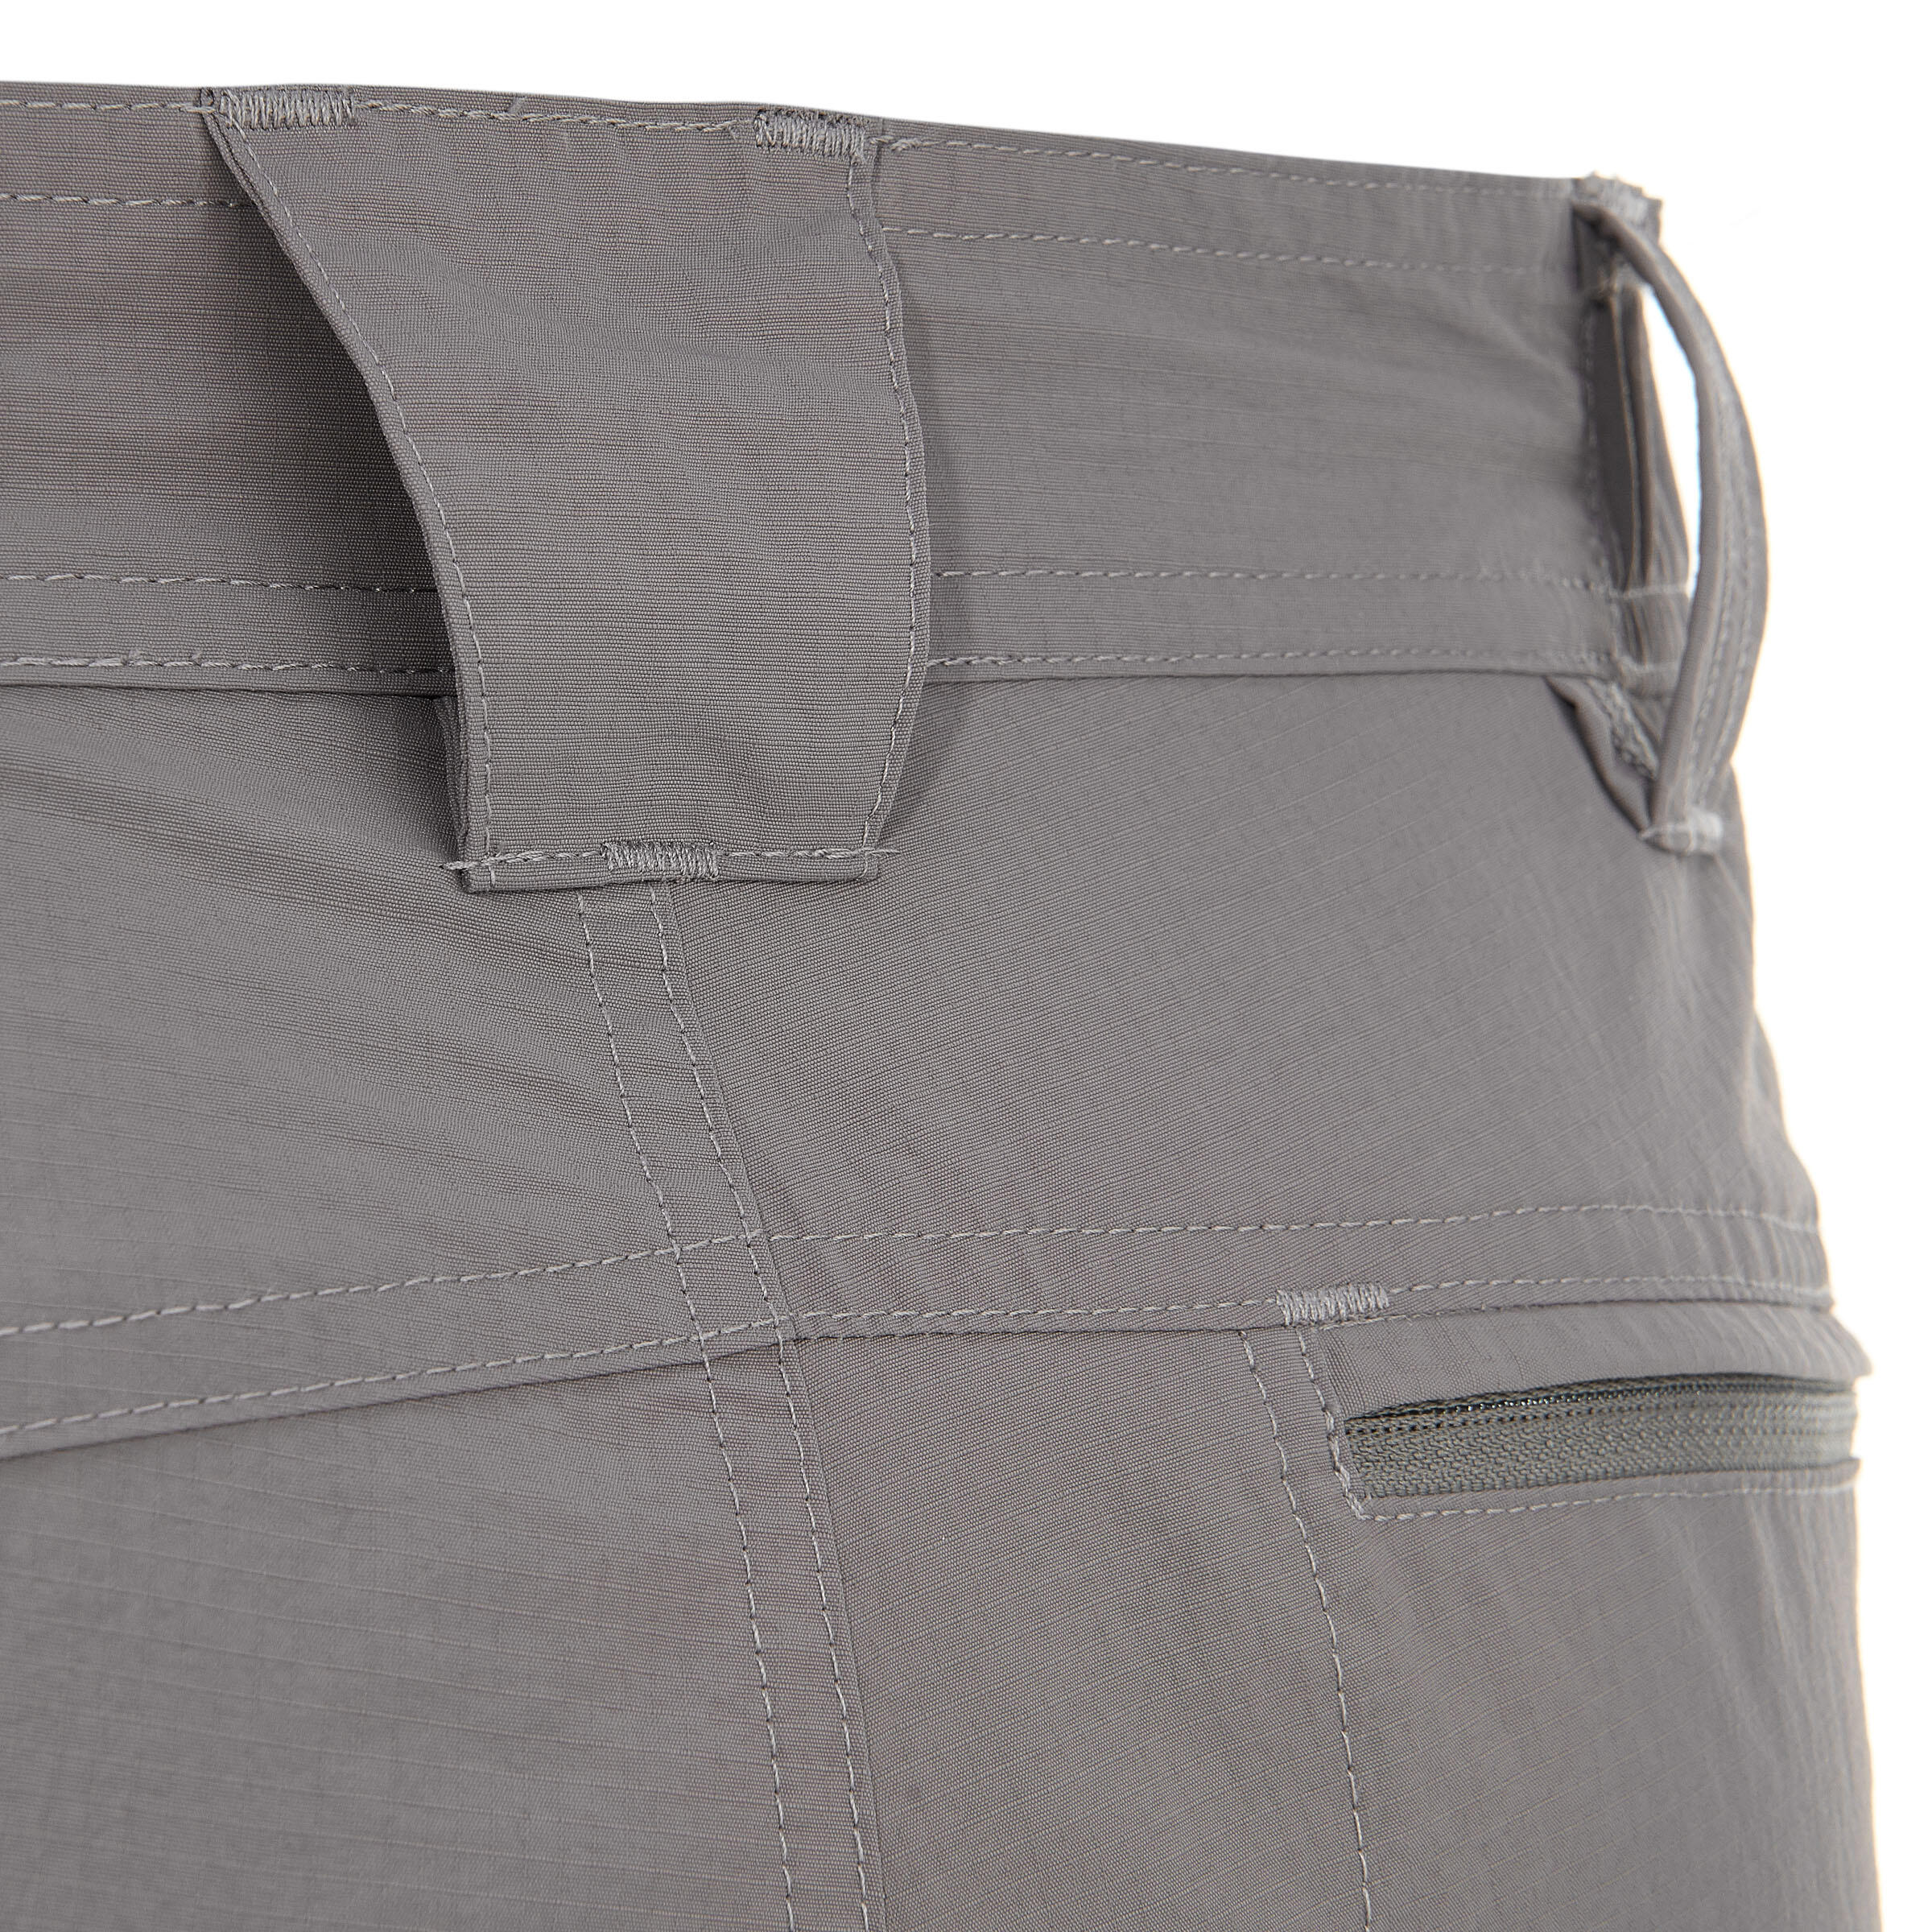 Forclaz 100 convertible hiking trousers - Light Grey 13/19